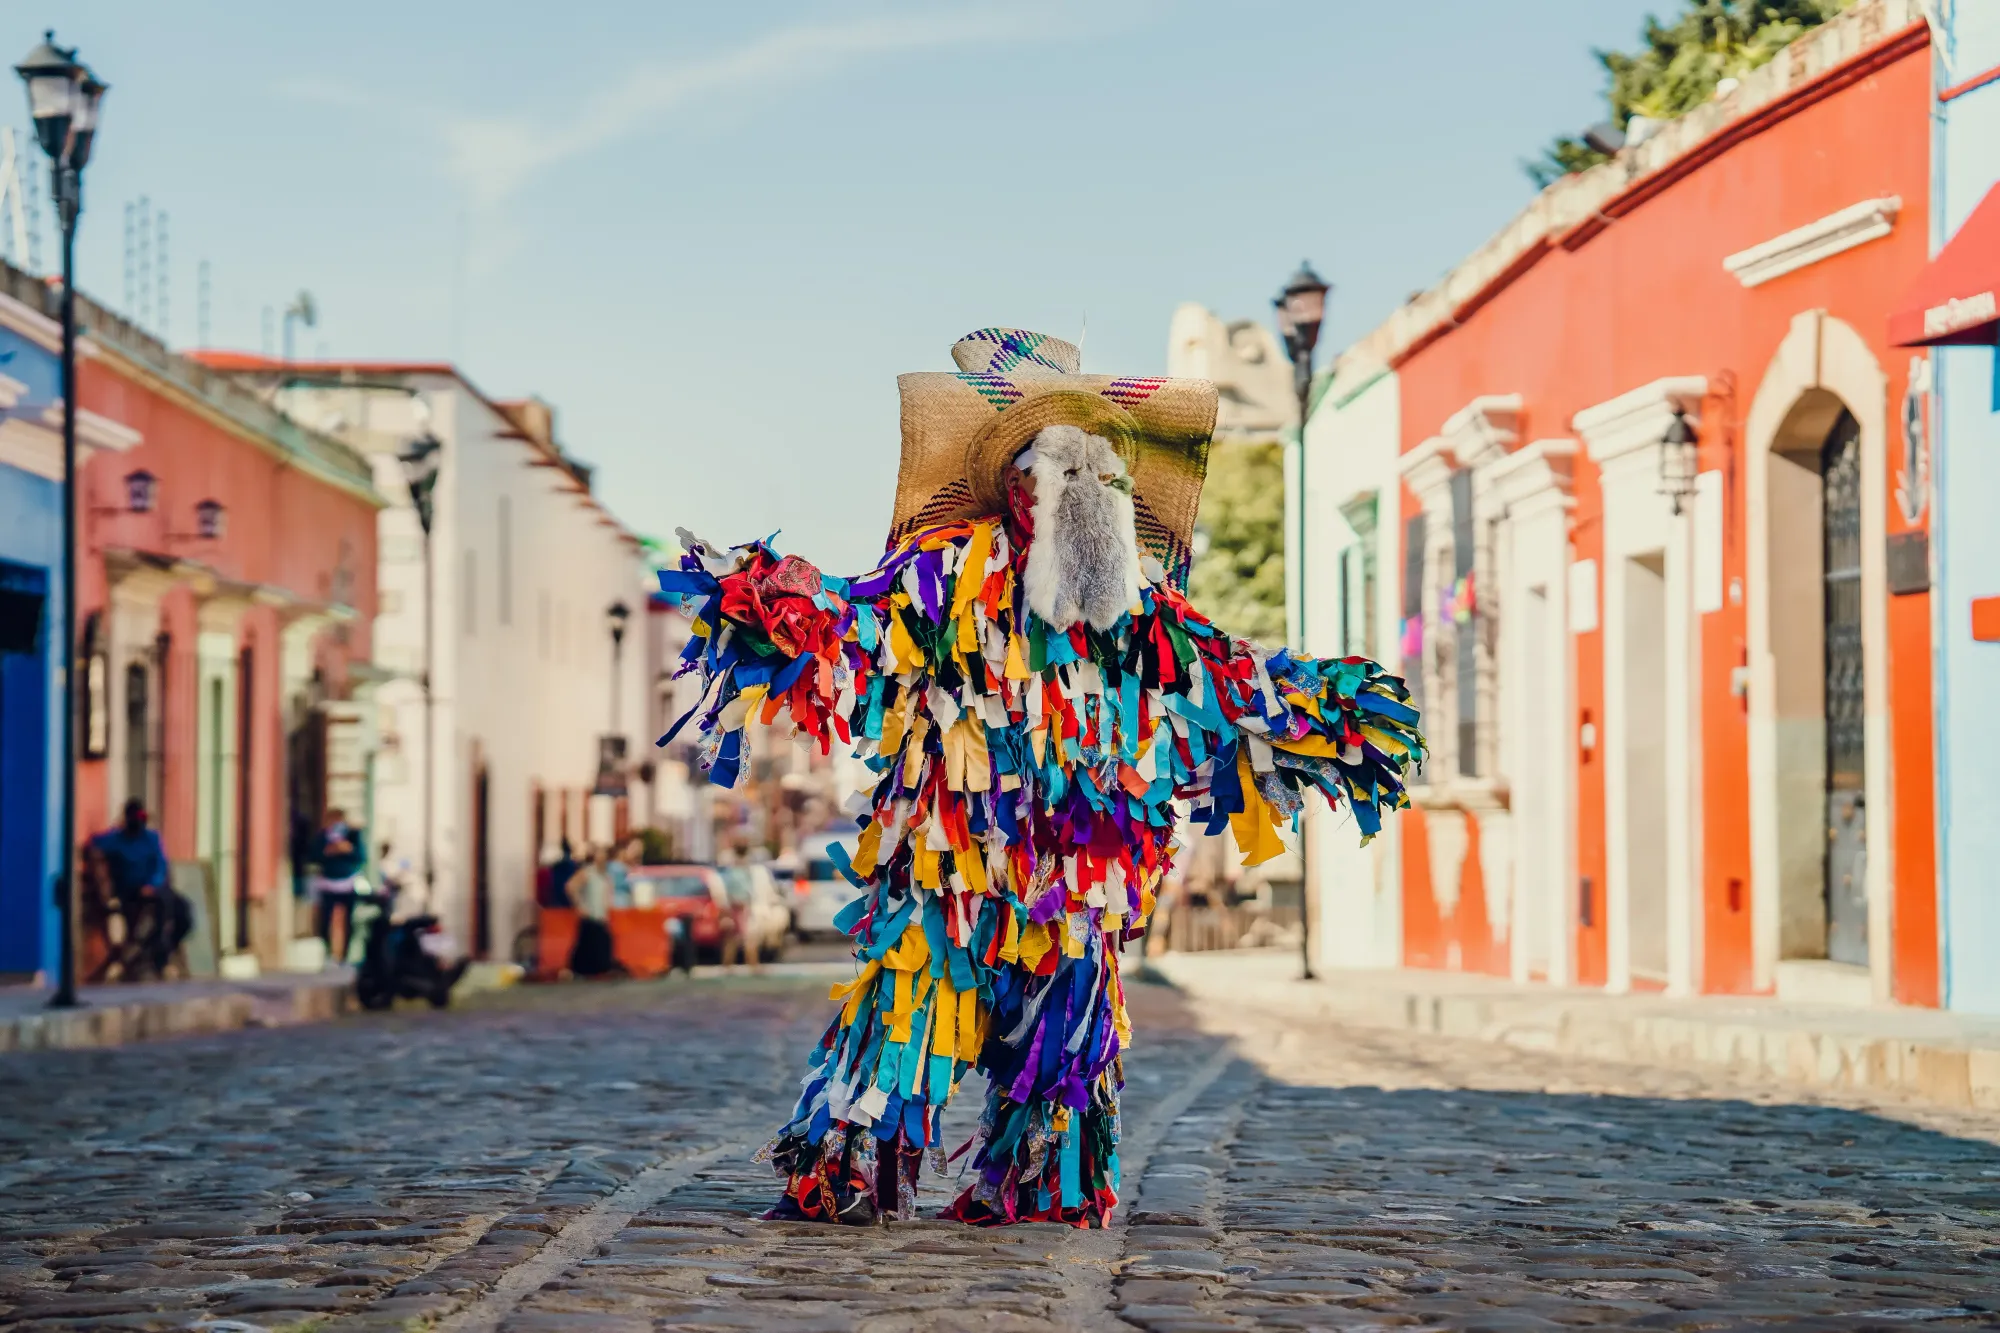 Image of a folklore dancer wearing traditonal dress in Mexico